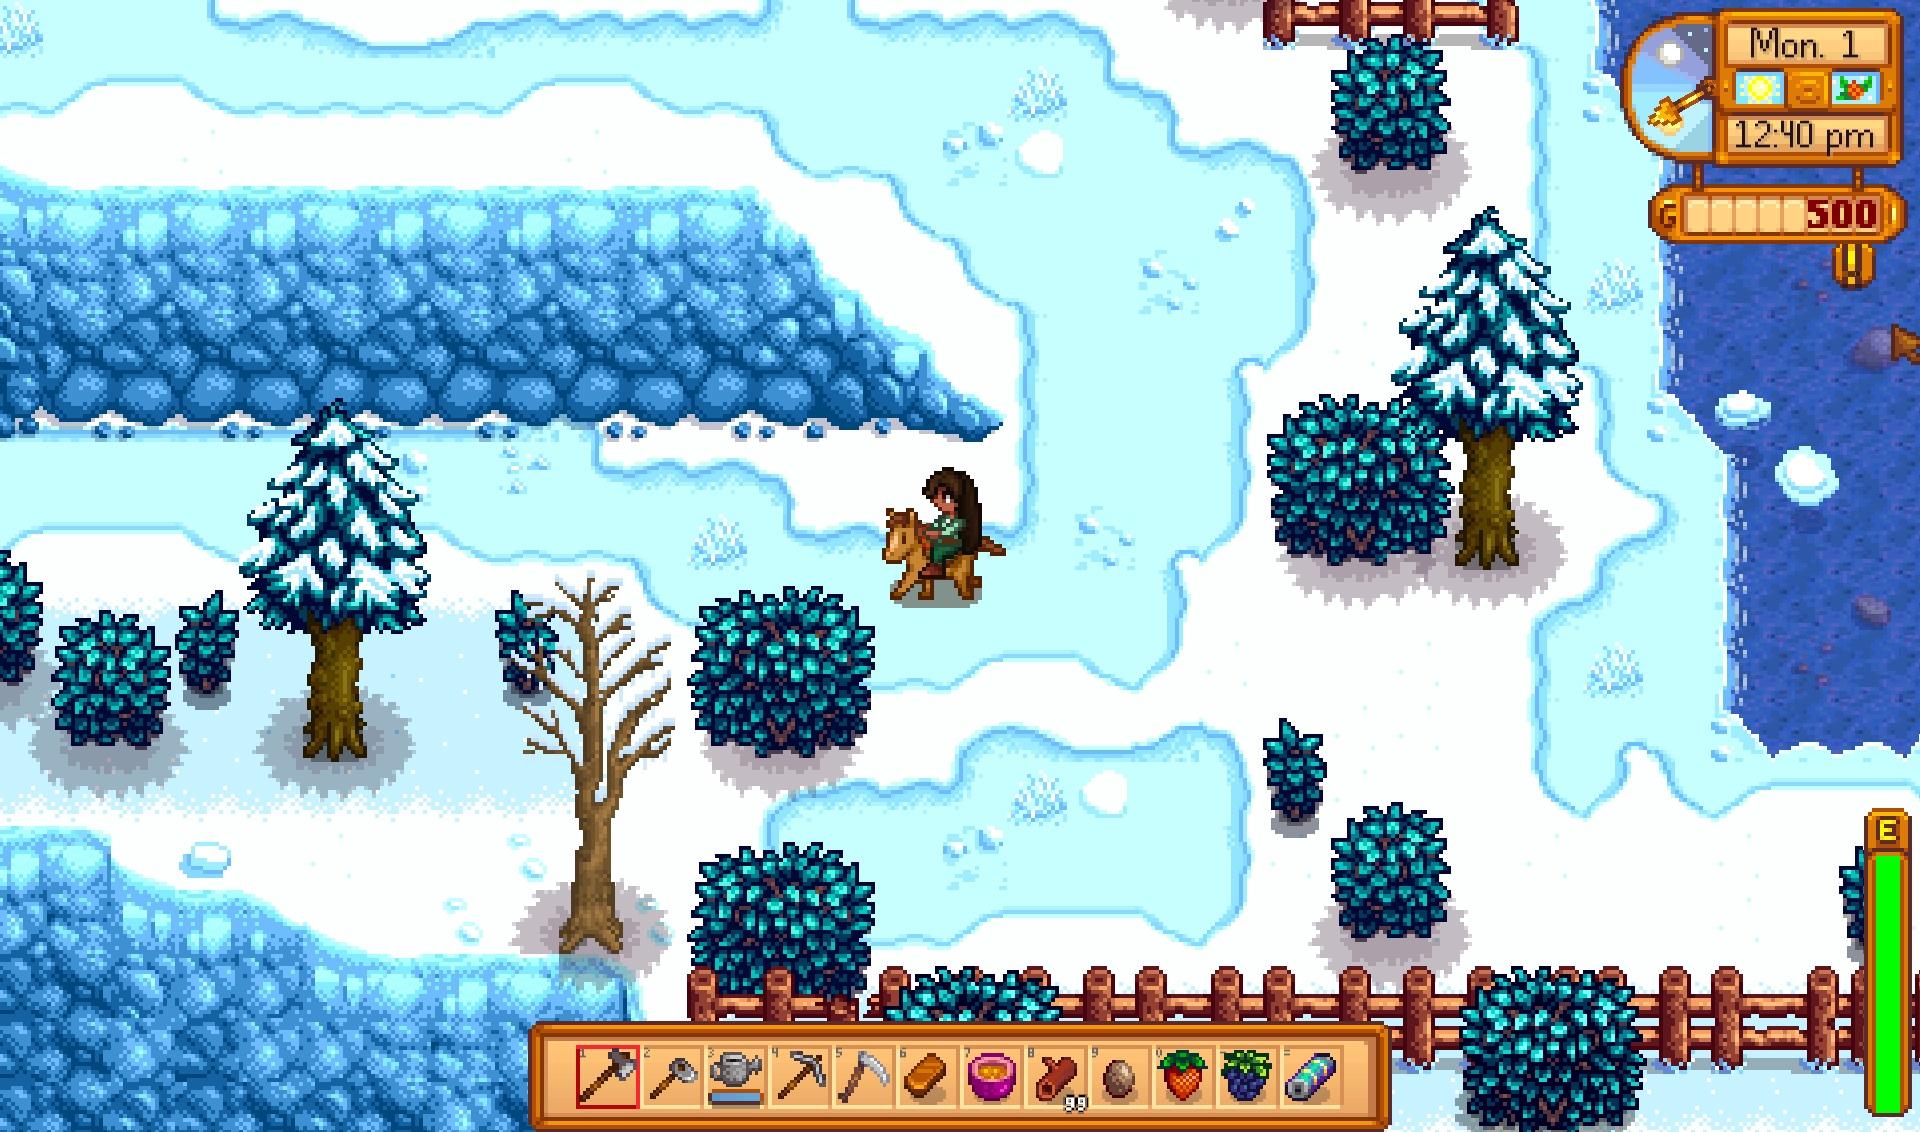 Stardew Valley Won't Be Getting Cross-Play Anytime Soon - The Tech Game